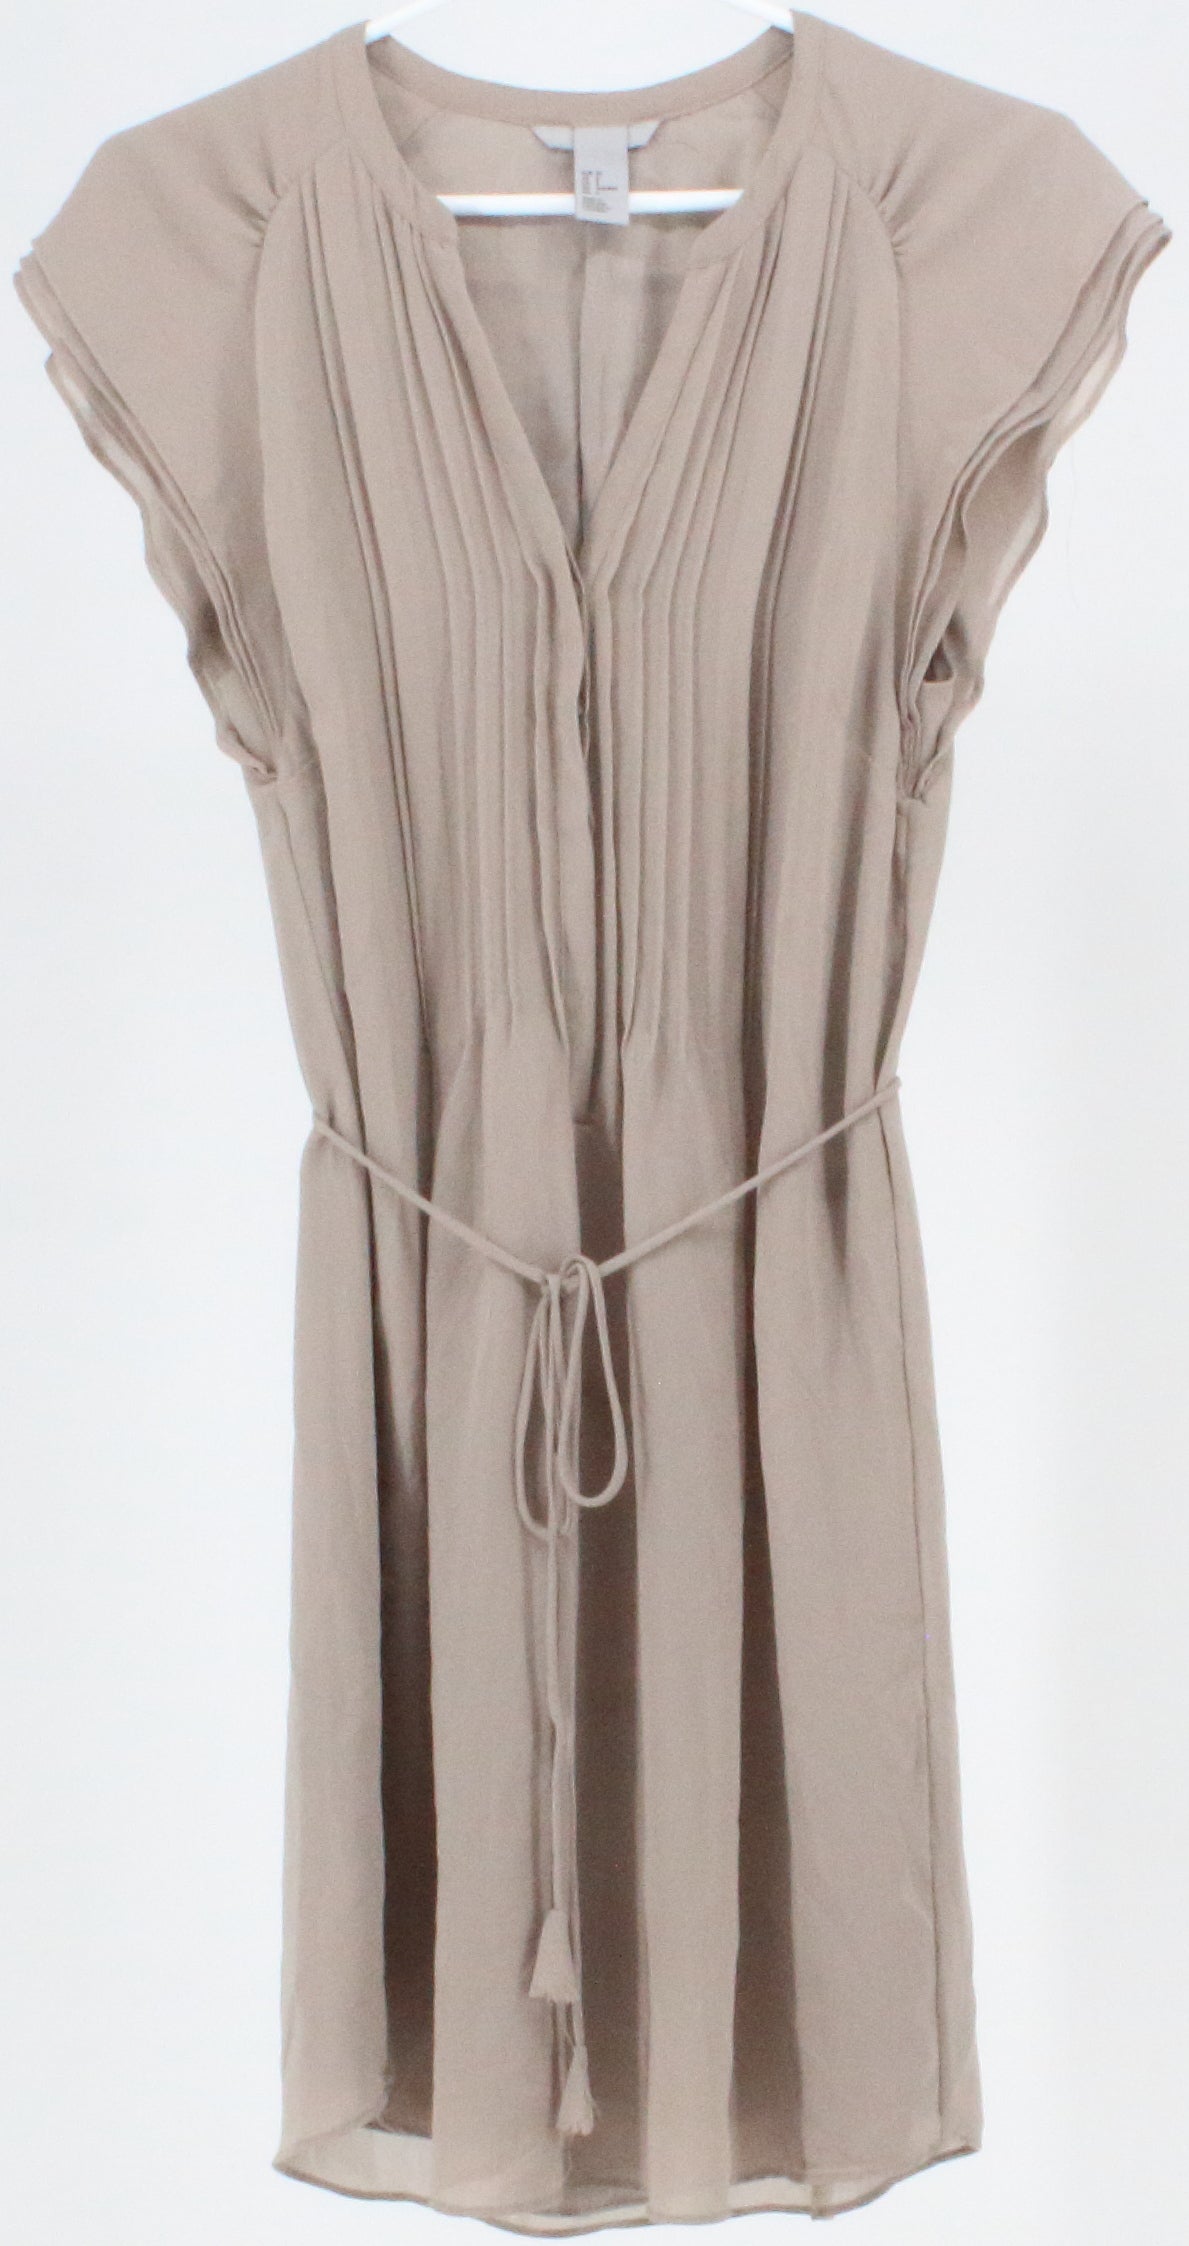 H&M Taupe Button-Up Dress